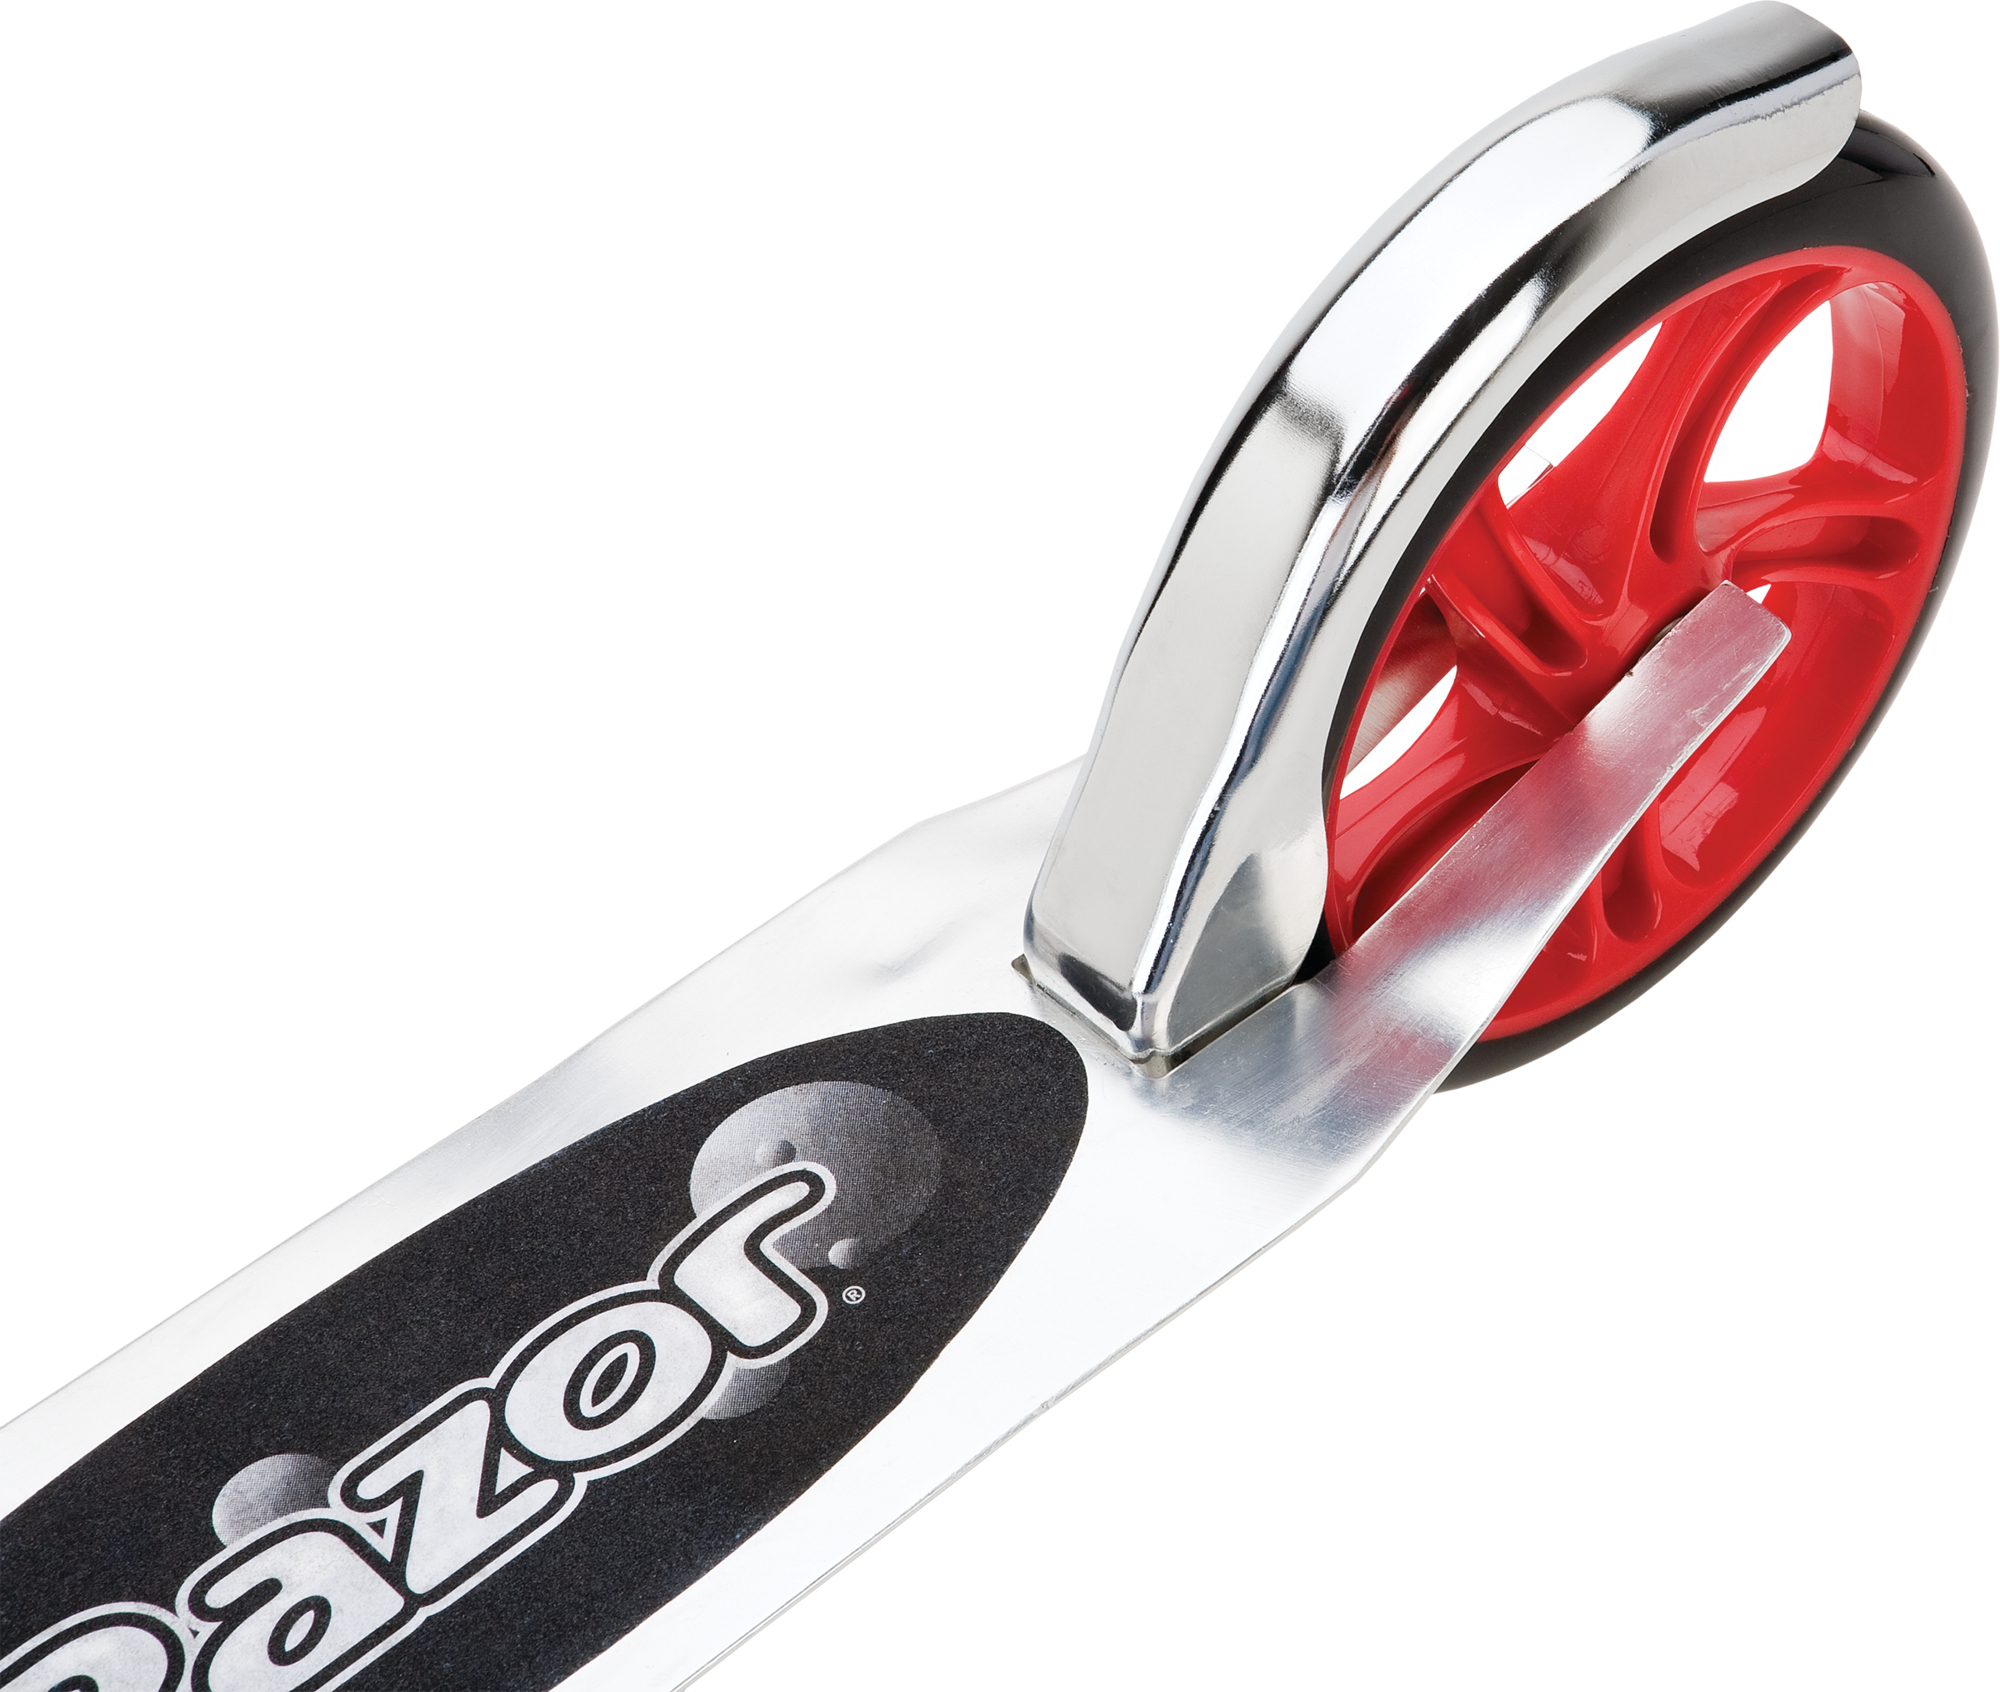 Razor A5 Lux Kick Scooter - Red/ Silver, Large 8" Wheels, Foldable, for Riders up to 220 lbs - image 4 of 9